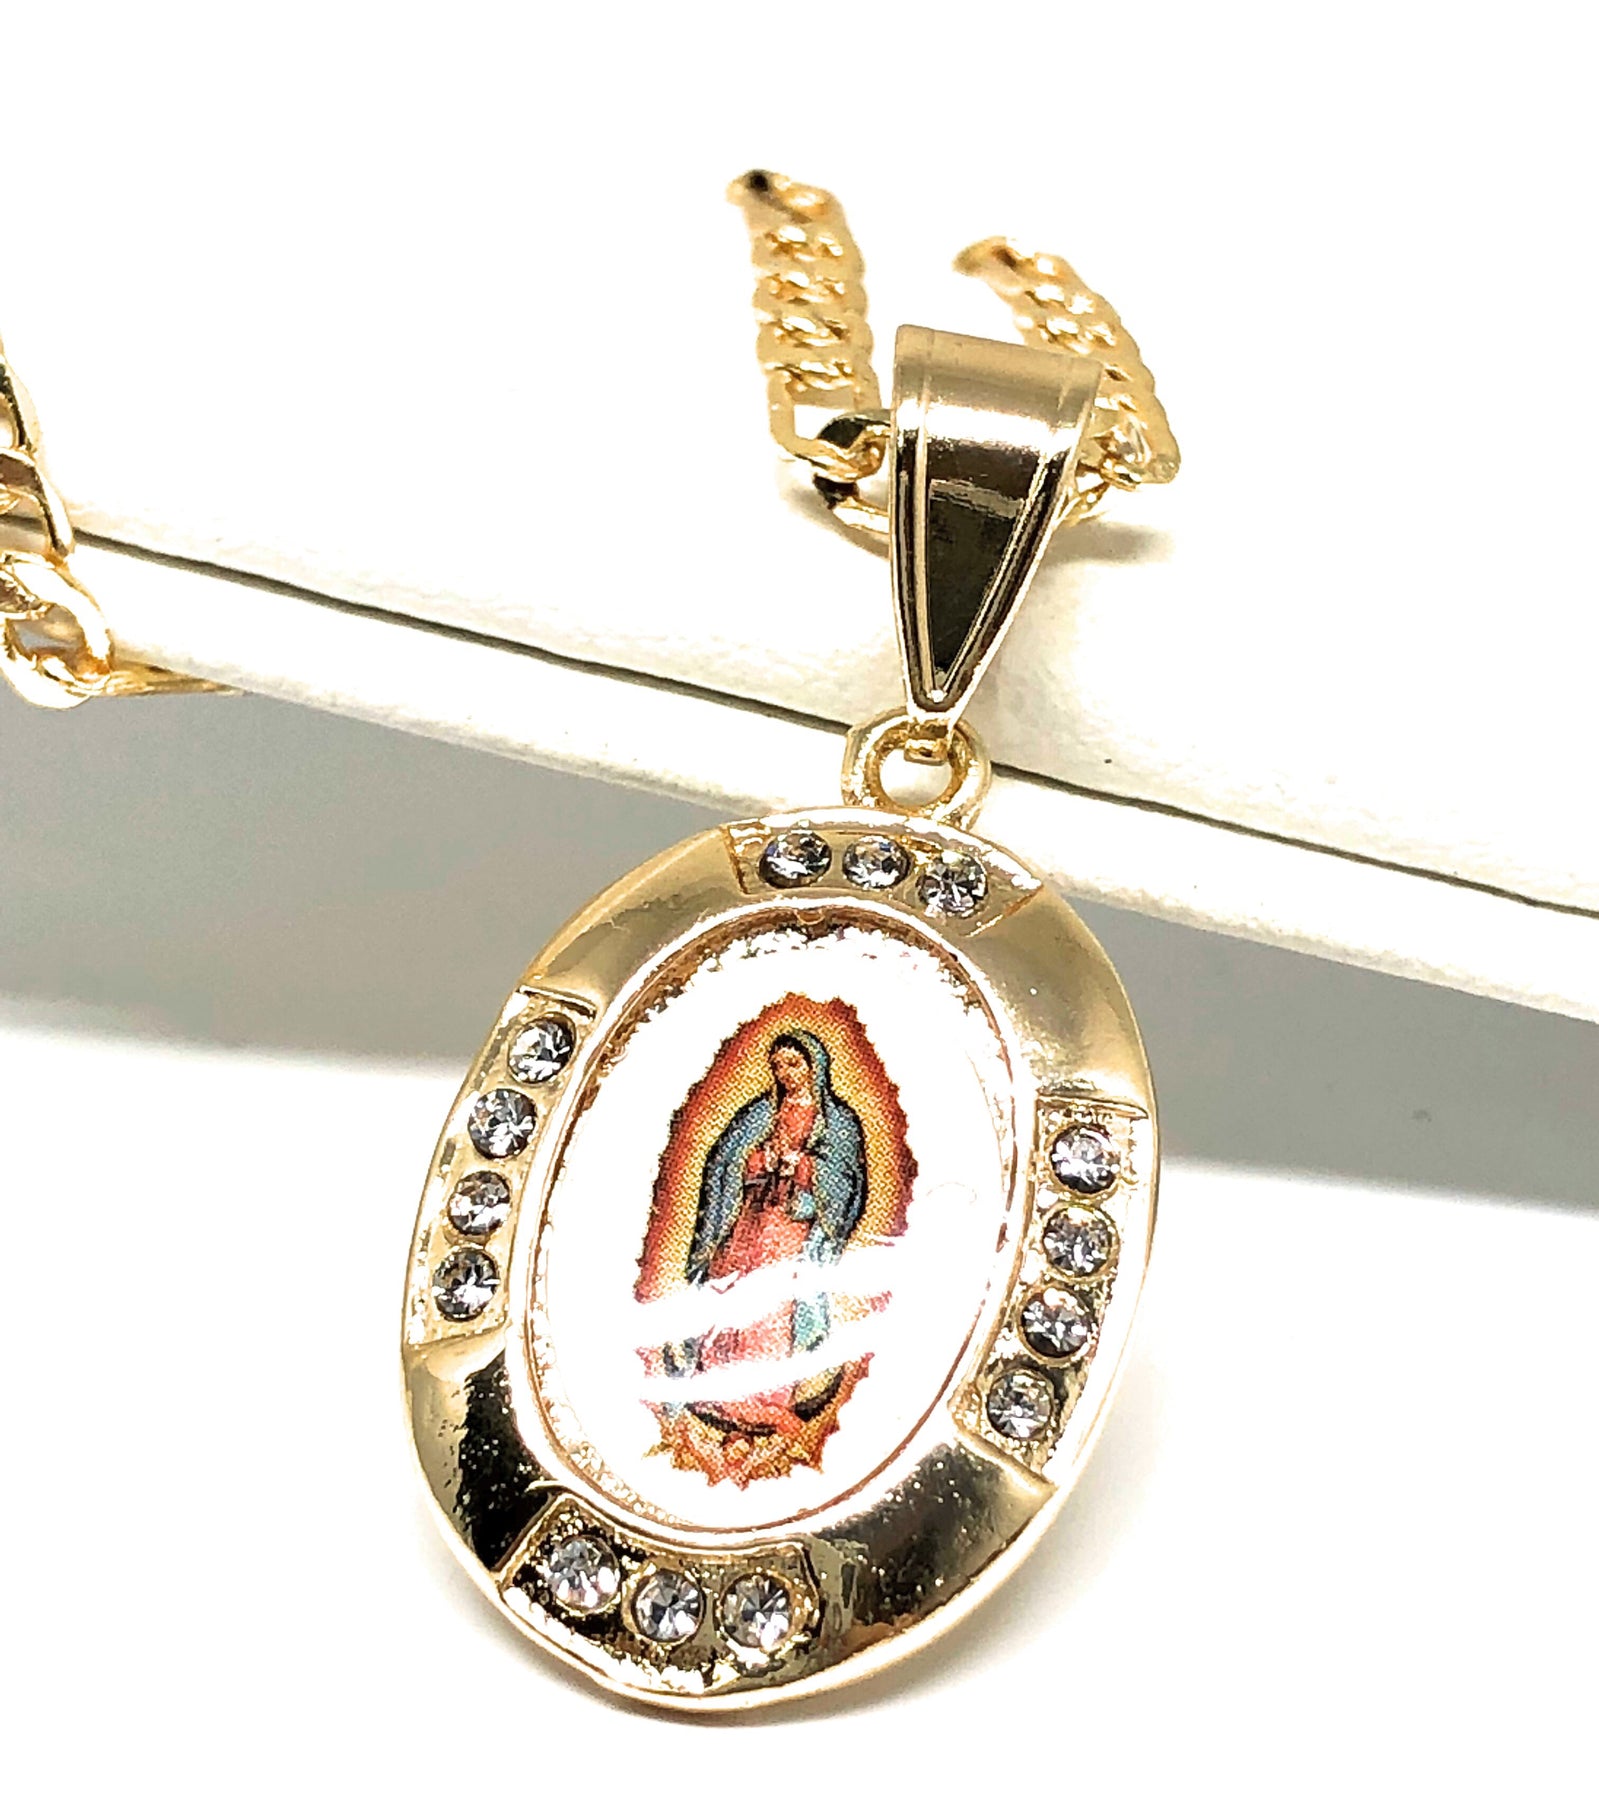 Anoi ir a buscar referencia Gold Plated Virgin Mary Pendant Necklace Virgen de Guadalupe Pendant – Fran  & Co Jewelry